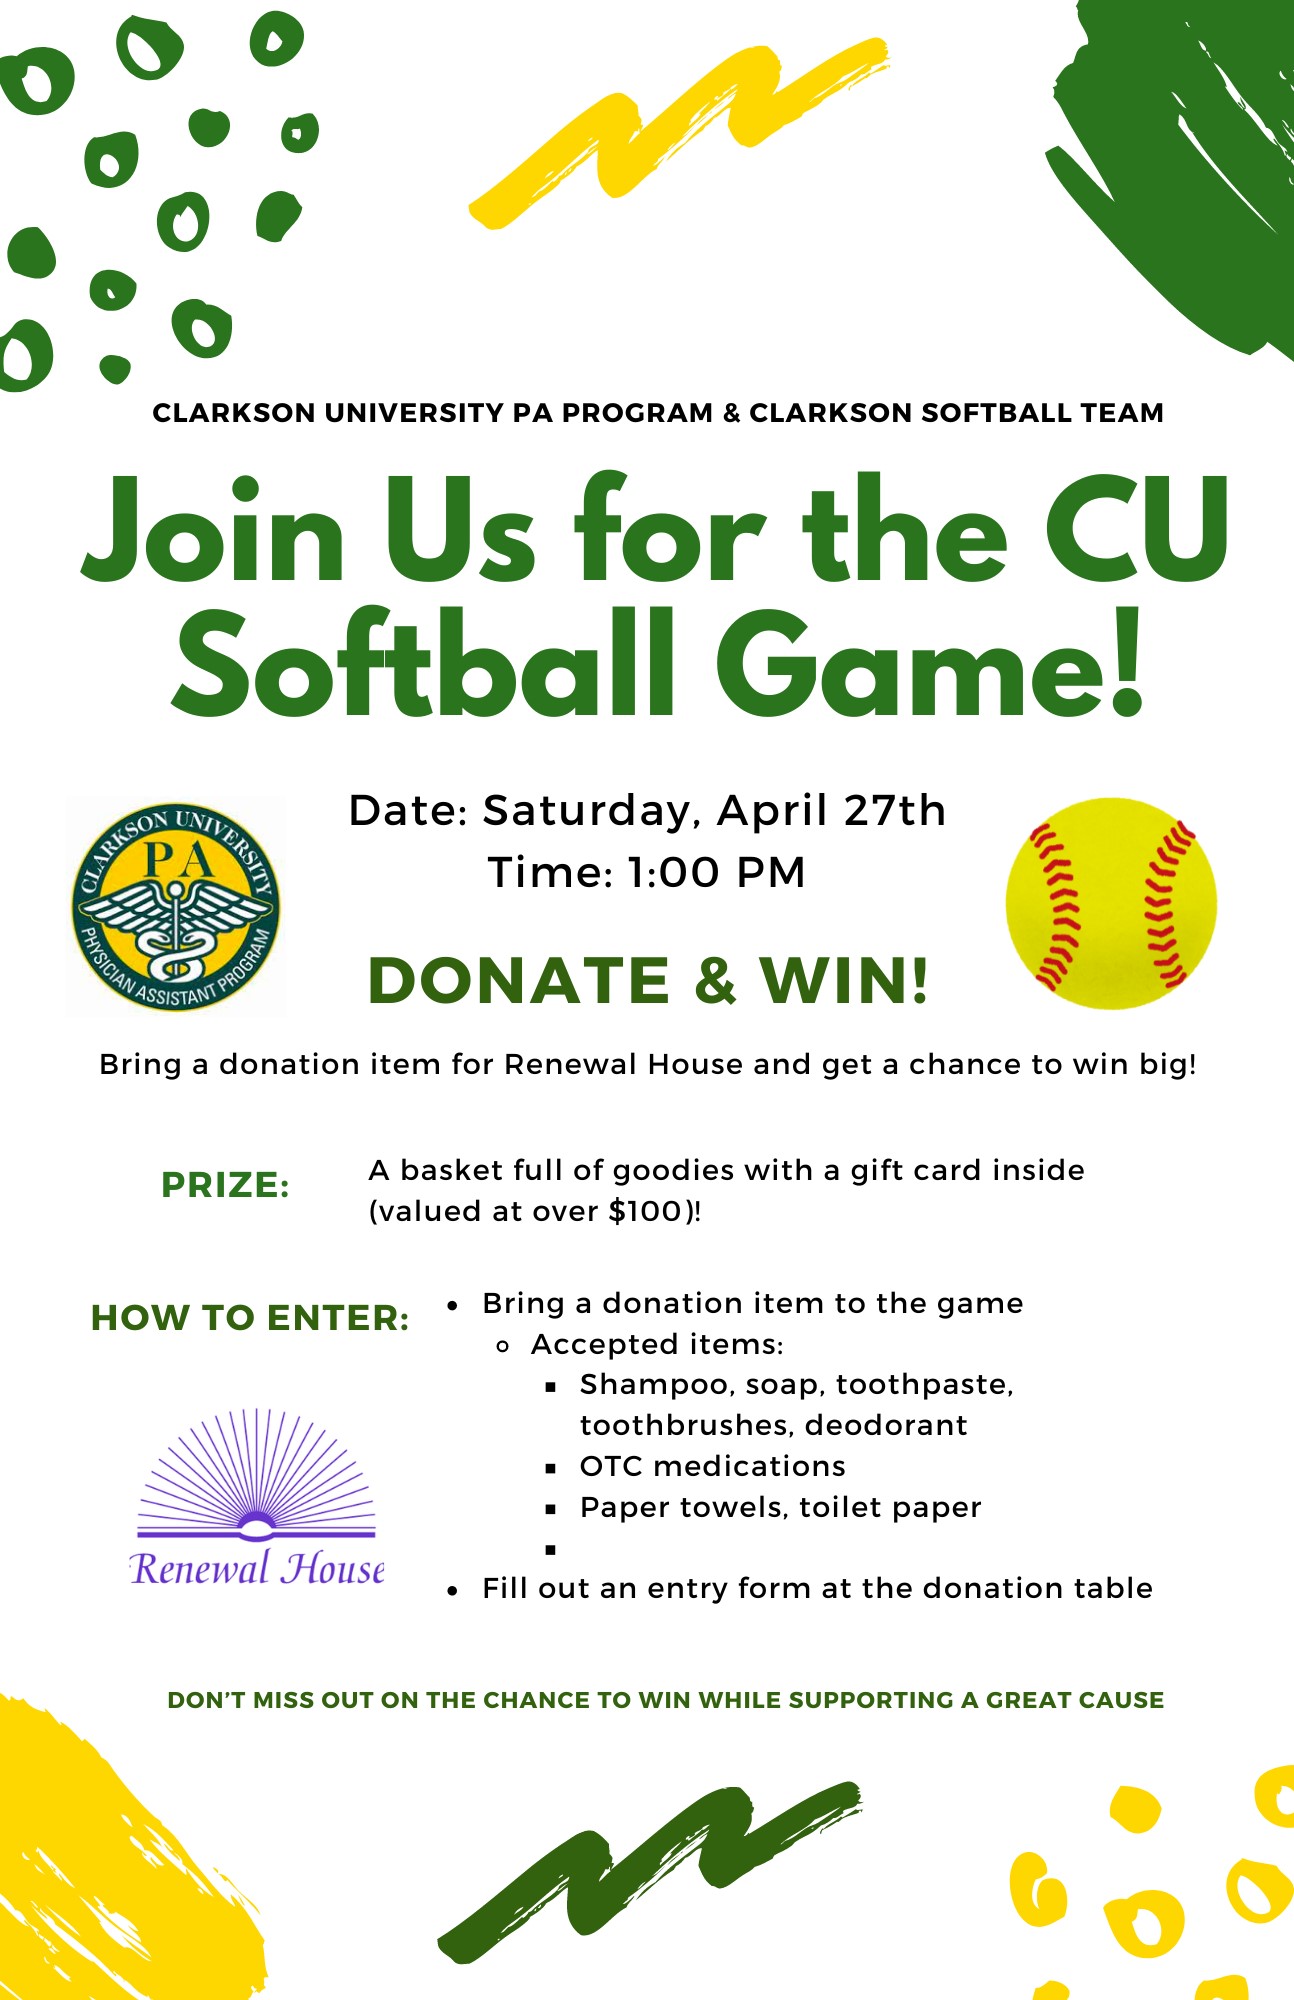 A white, green, and gold advertisement for a donation drive for the Renewal House that will be taking place at the Clarkson University softball game on Saturday, April 27th at 1:00PM. The advertisement was created by the Clarkson University Physician Assistant Studies Class of 2024 in partnership with the Clarkson University softball team. There is a message that reads “Join us for the CU Softball Game!” There is an image of the Clarkson PA program logo and a clipart image of a softball. Text below the images read “DONATE & WIN” and a list of accepted items includes shampoo, soap, toothbrushes, toothpaste, deodorant, paper towels, toilet paper, and over the counter medications. At the bottom of the advertisement it states "How to enter: bring a donation item to the game and fill out an entry form at the donation table".